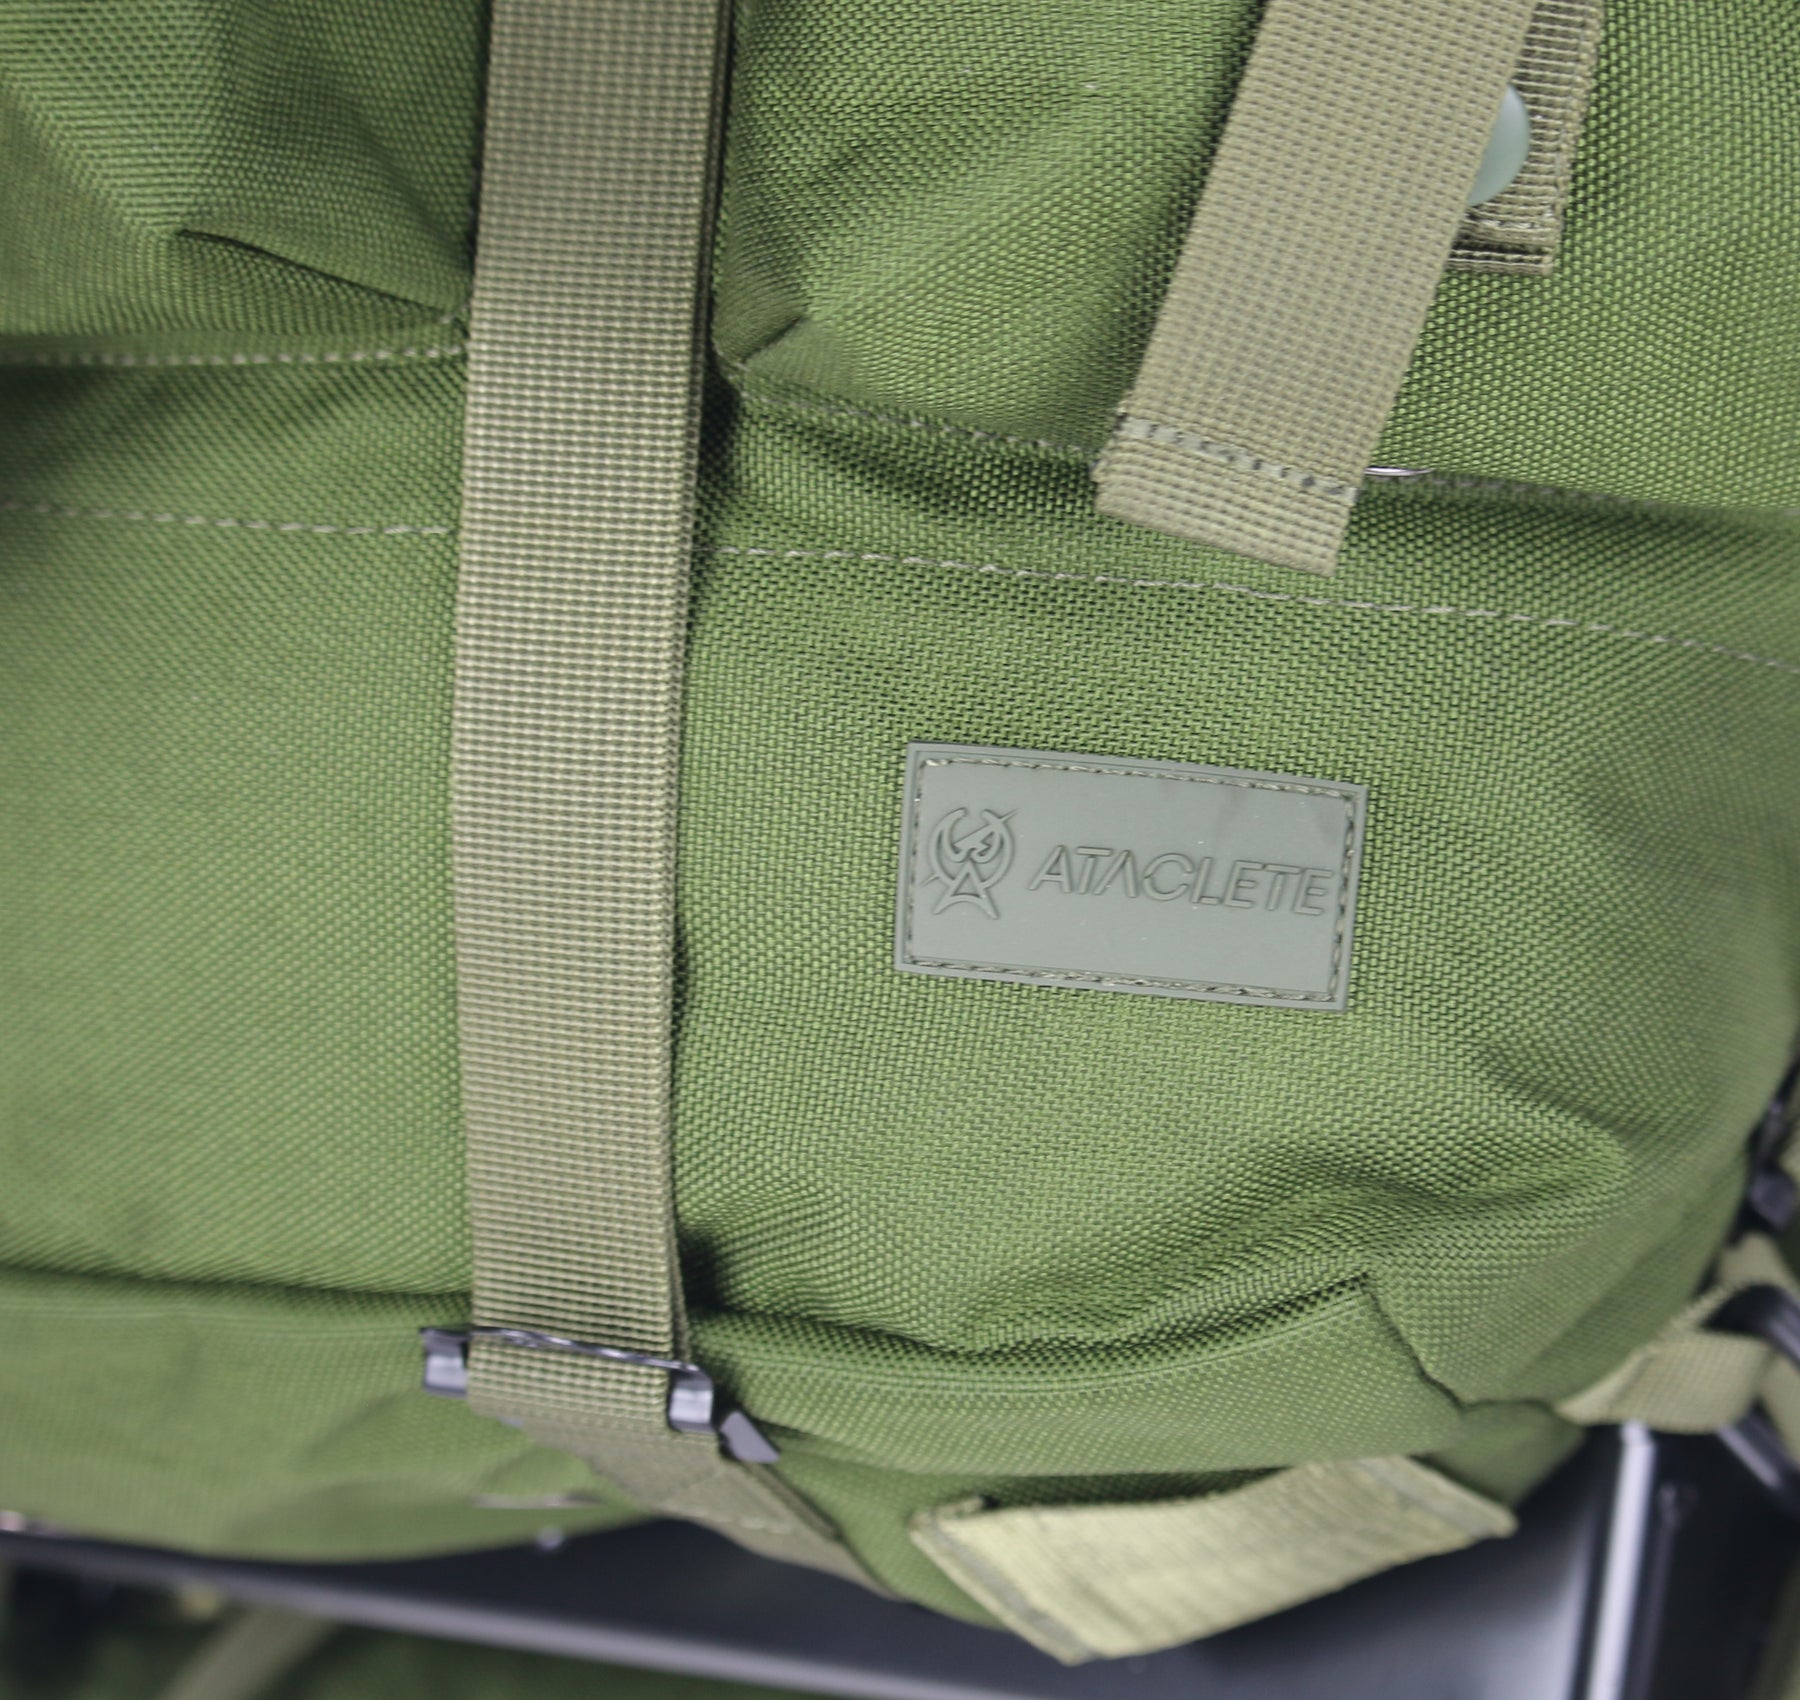 ALICE Pack Military - USAF Rucksack with Frame | ATACLETE